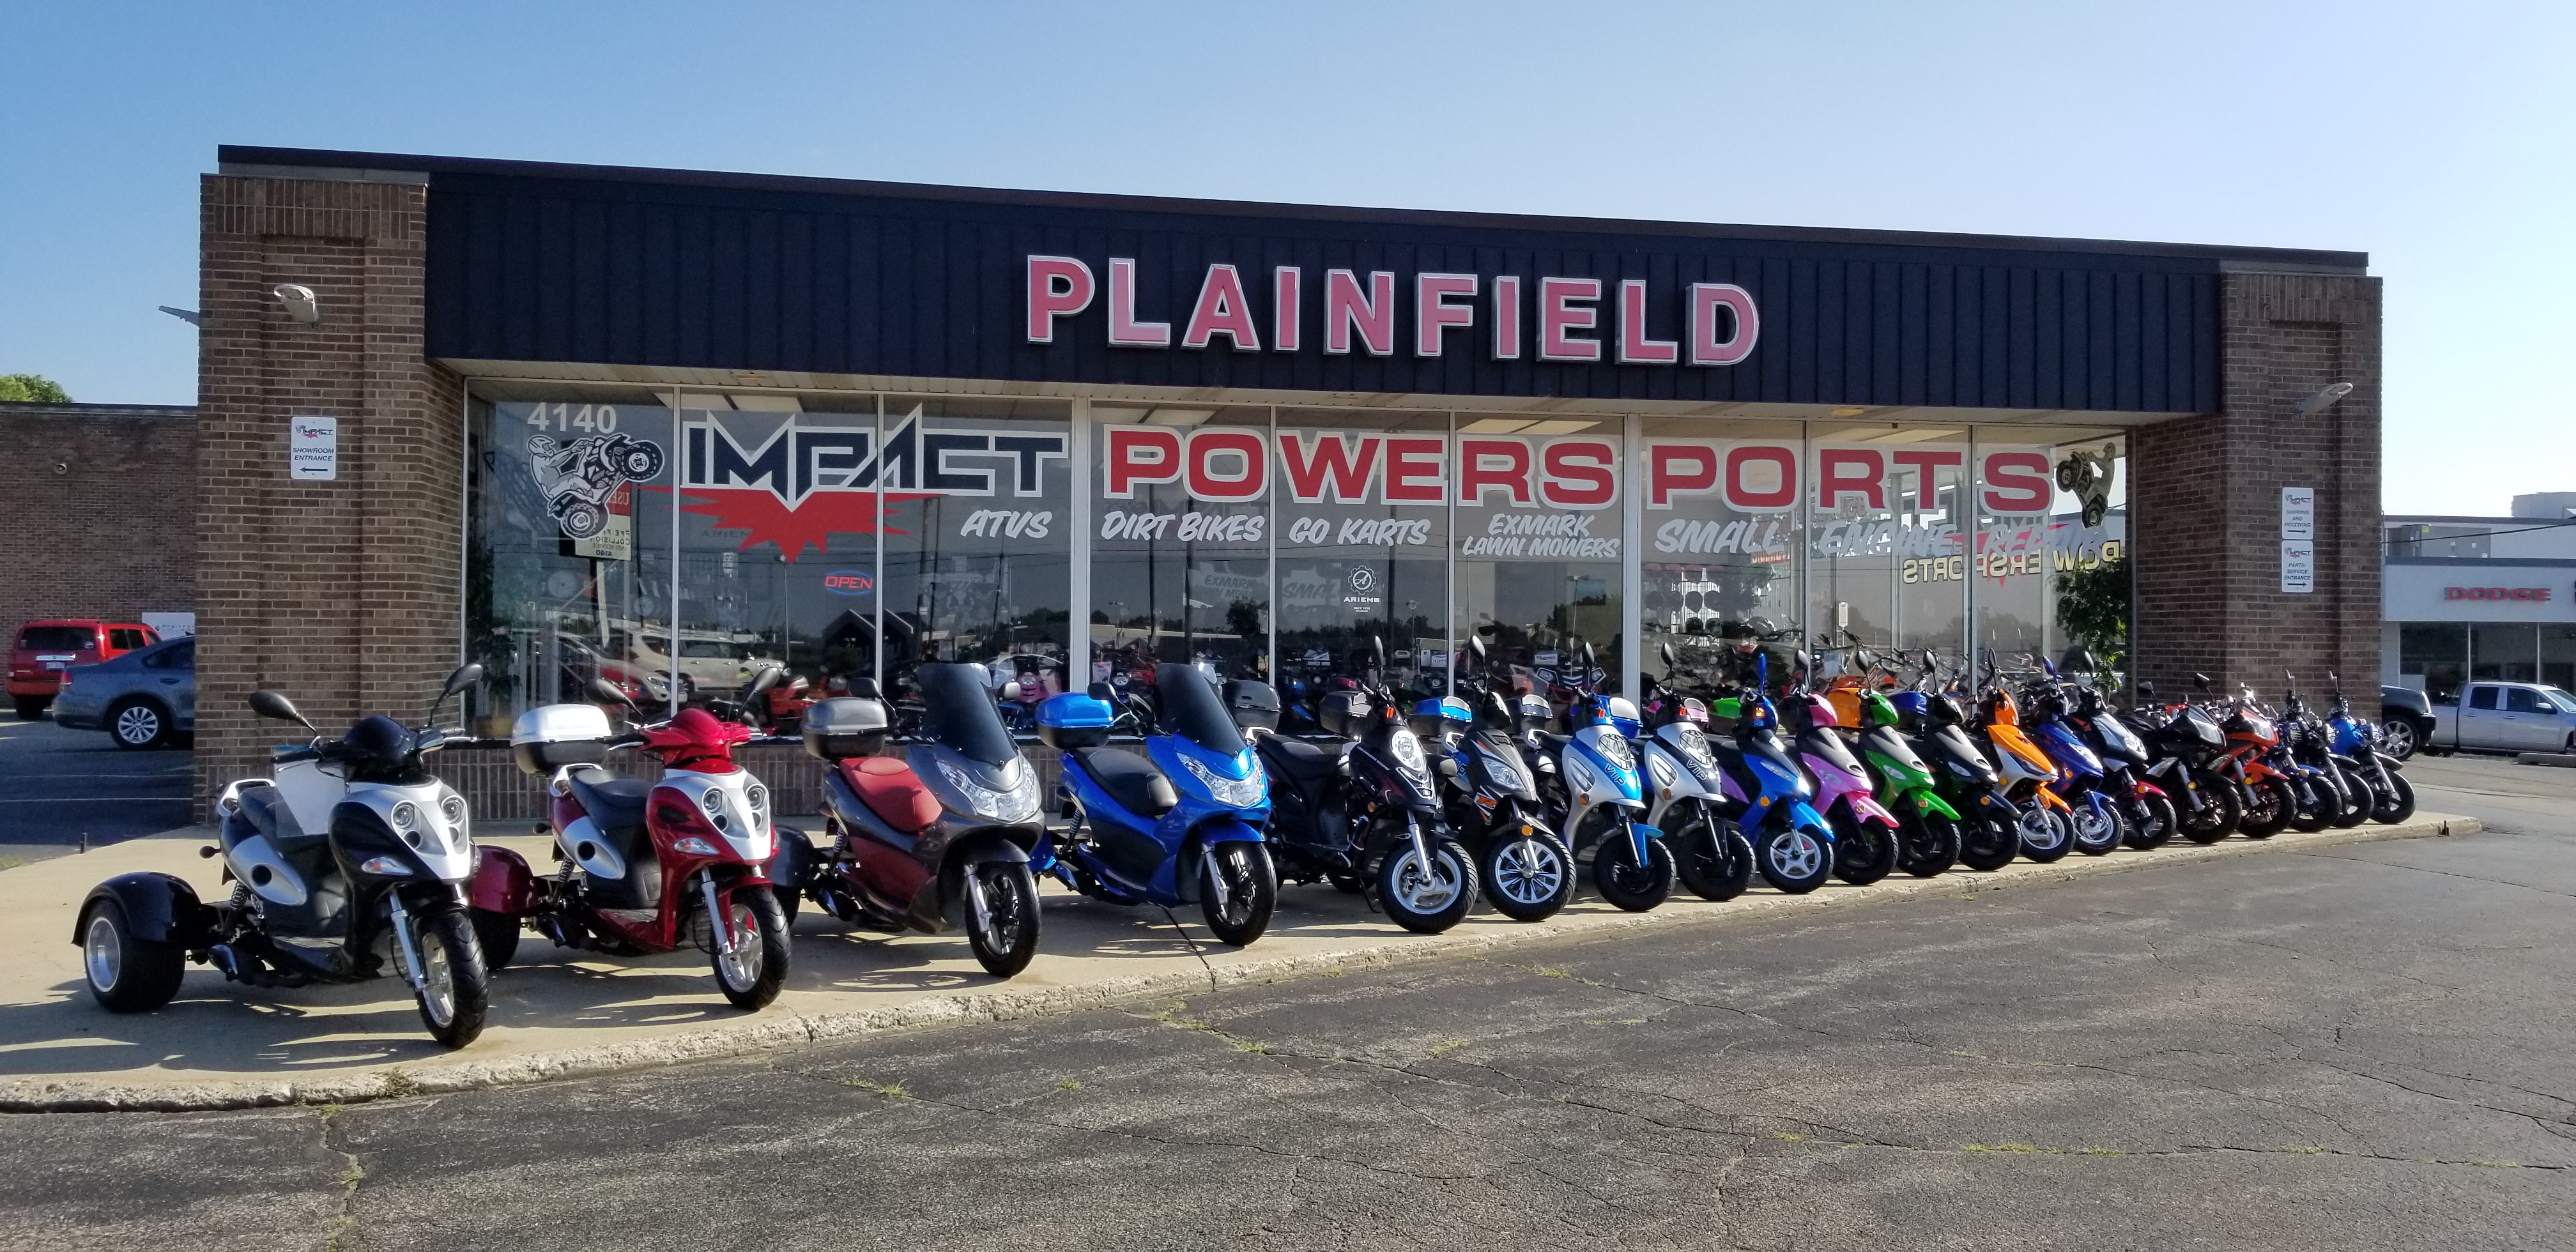 Impact Power Sports – "More fun for less"